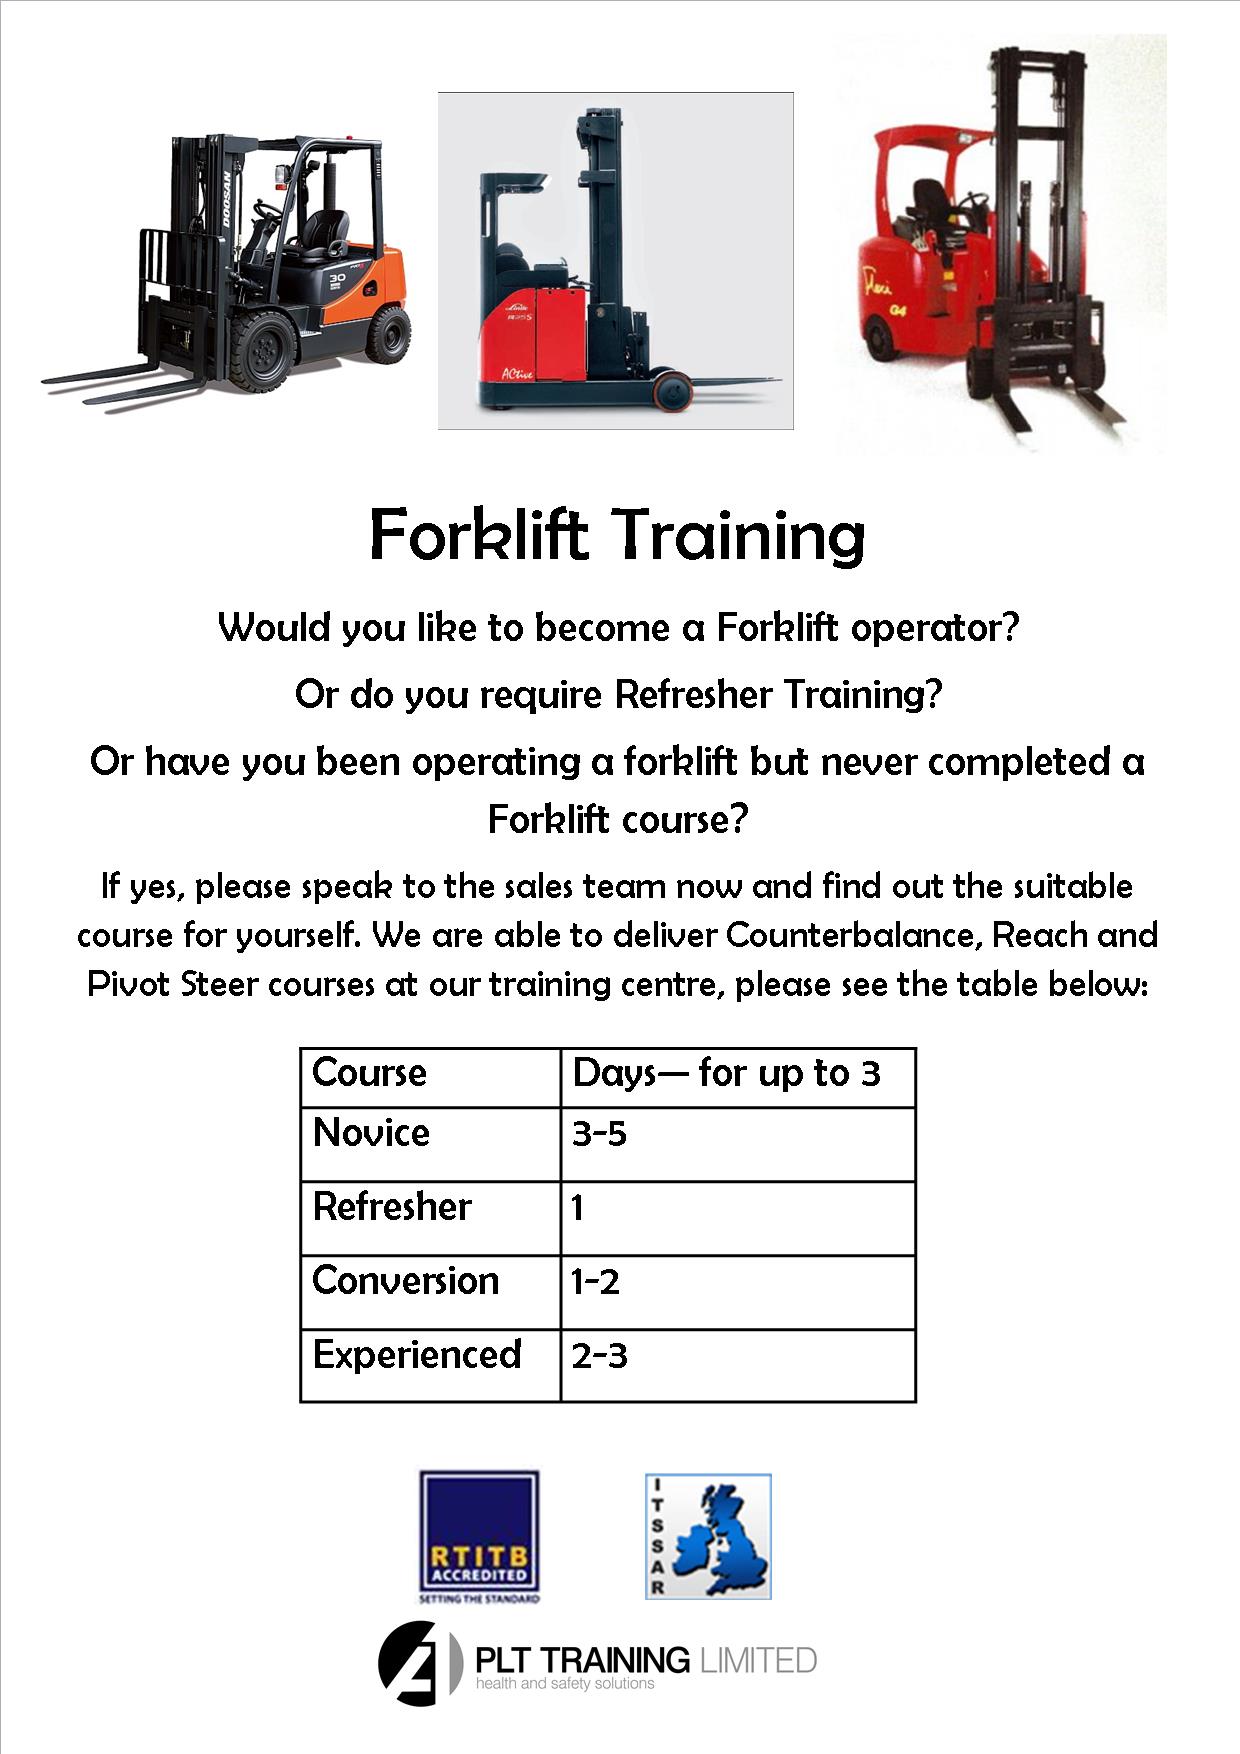 Plt Training Pa Twitter In Our Training Centre We Are Able To Deliver Training On Counterbalance Reach And Pivot Steer Lift Trucks If You Are Interested In Any Of The Trucks Above